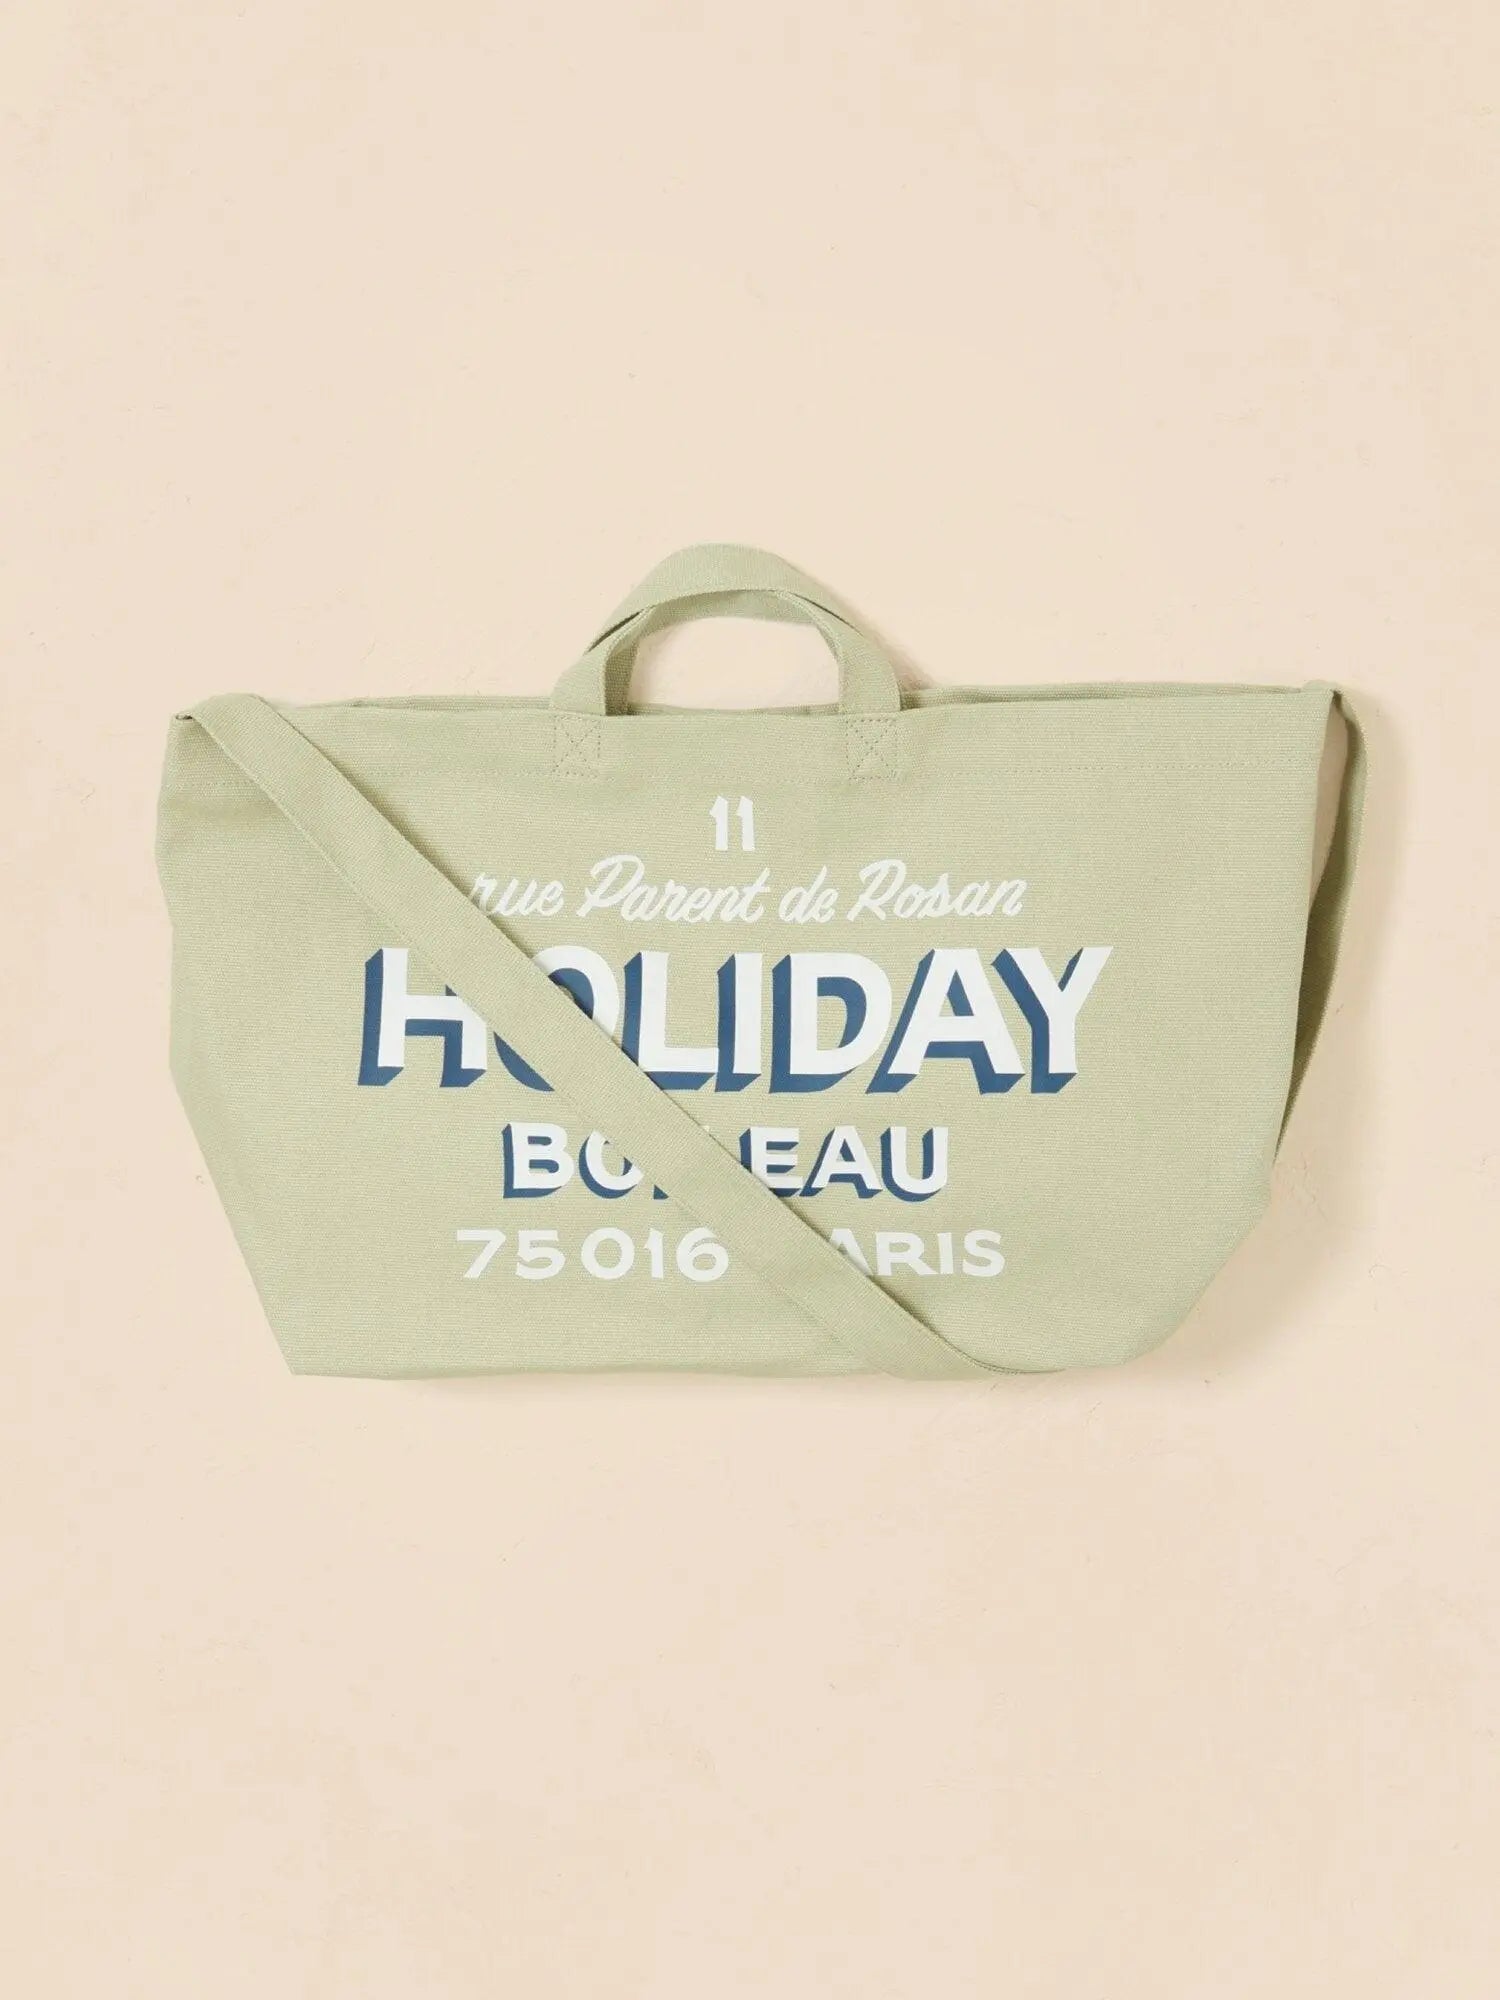 News Paper Green Bag - Holiday Boileau Holiday Boileau